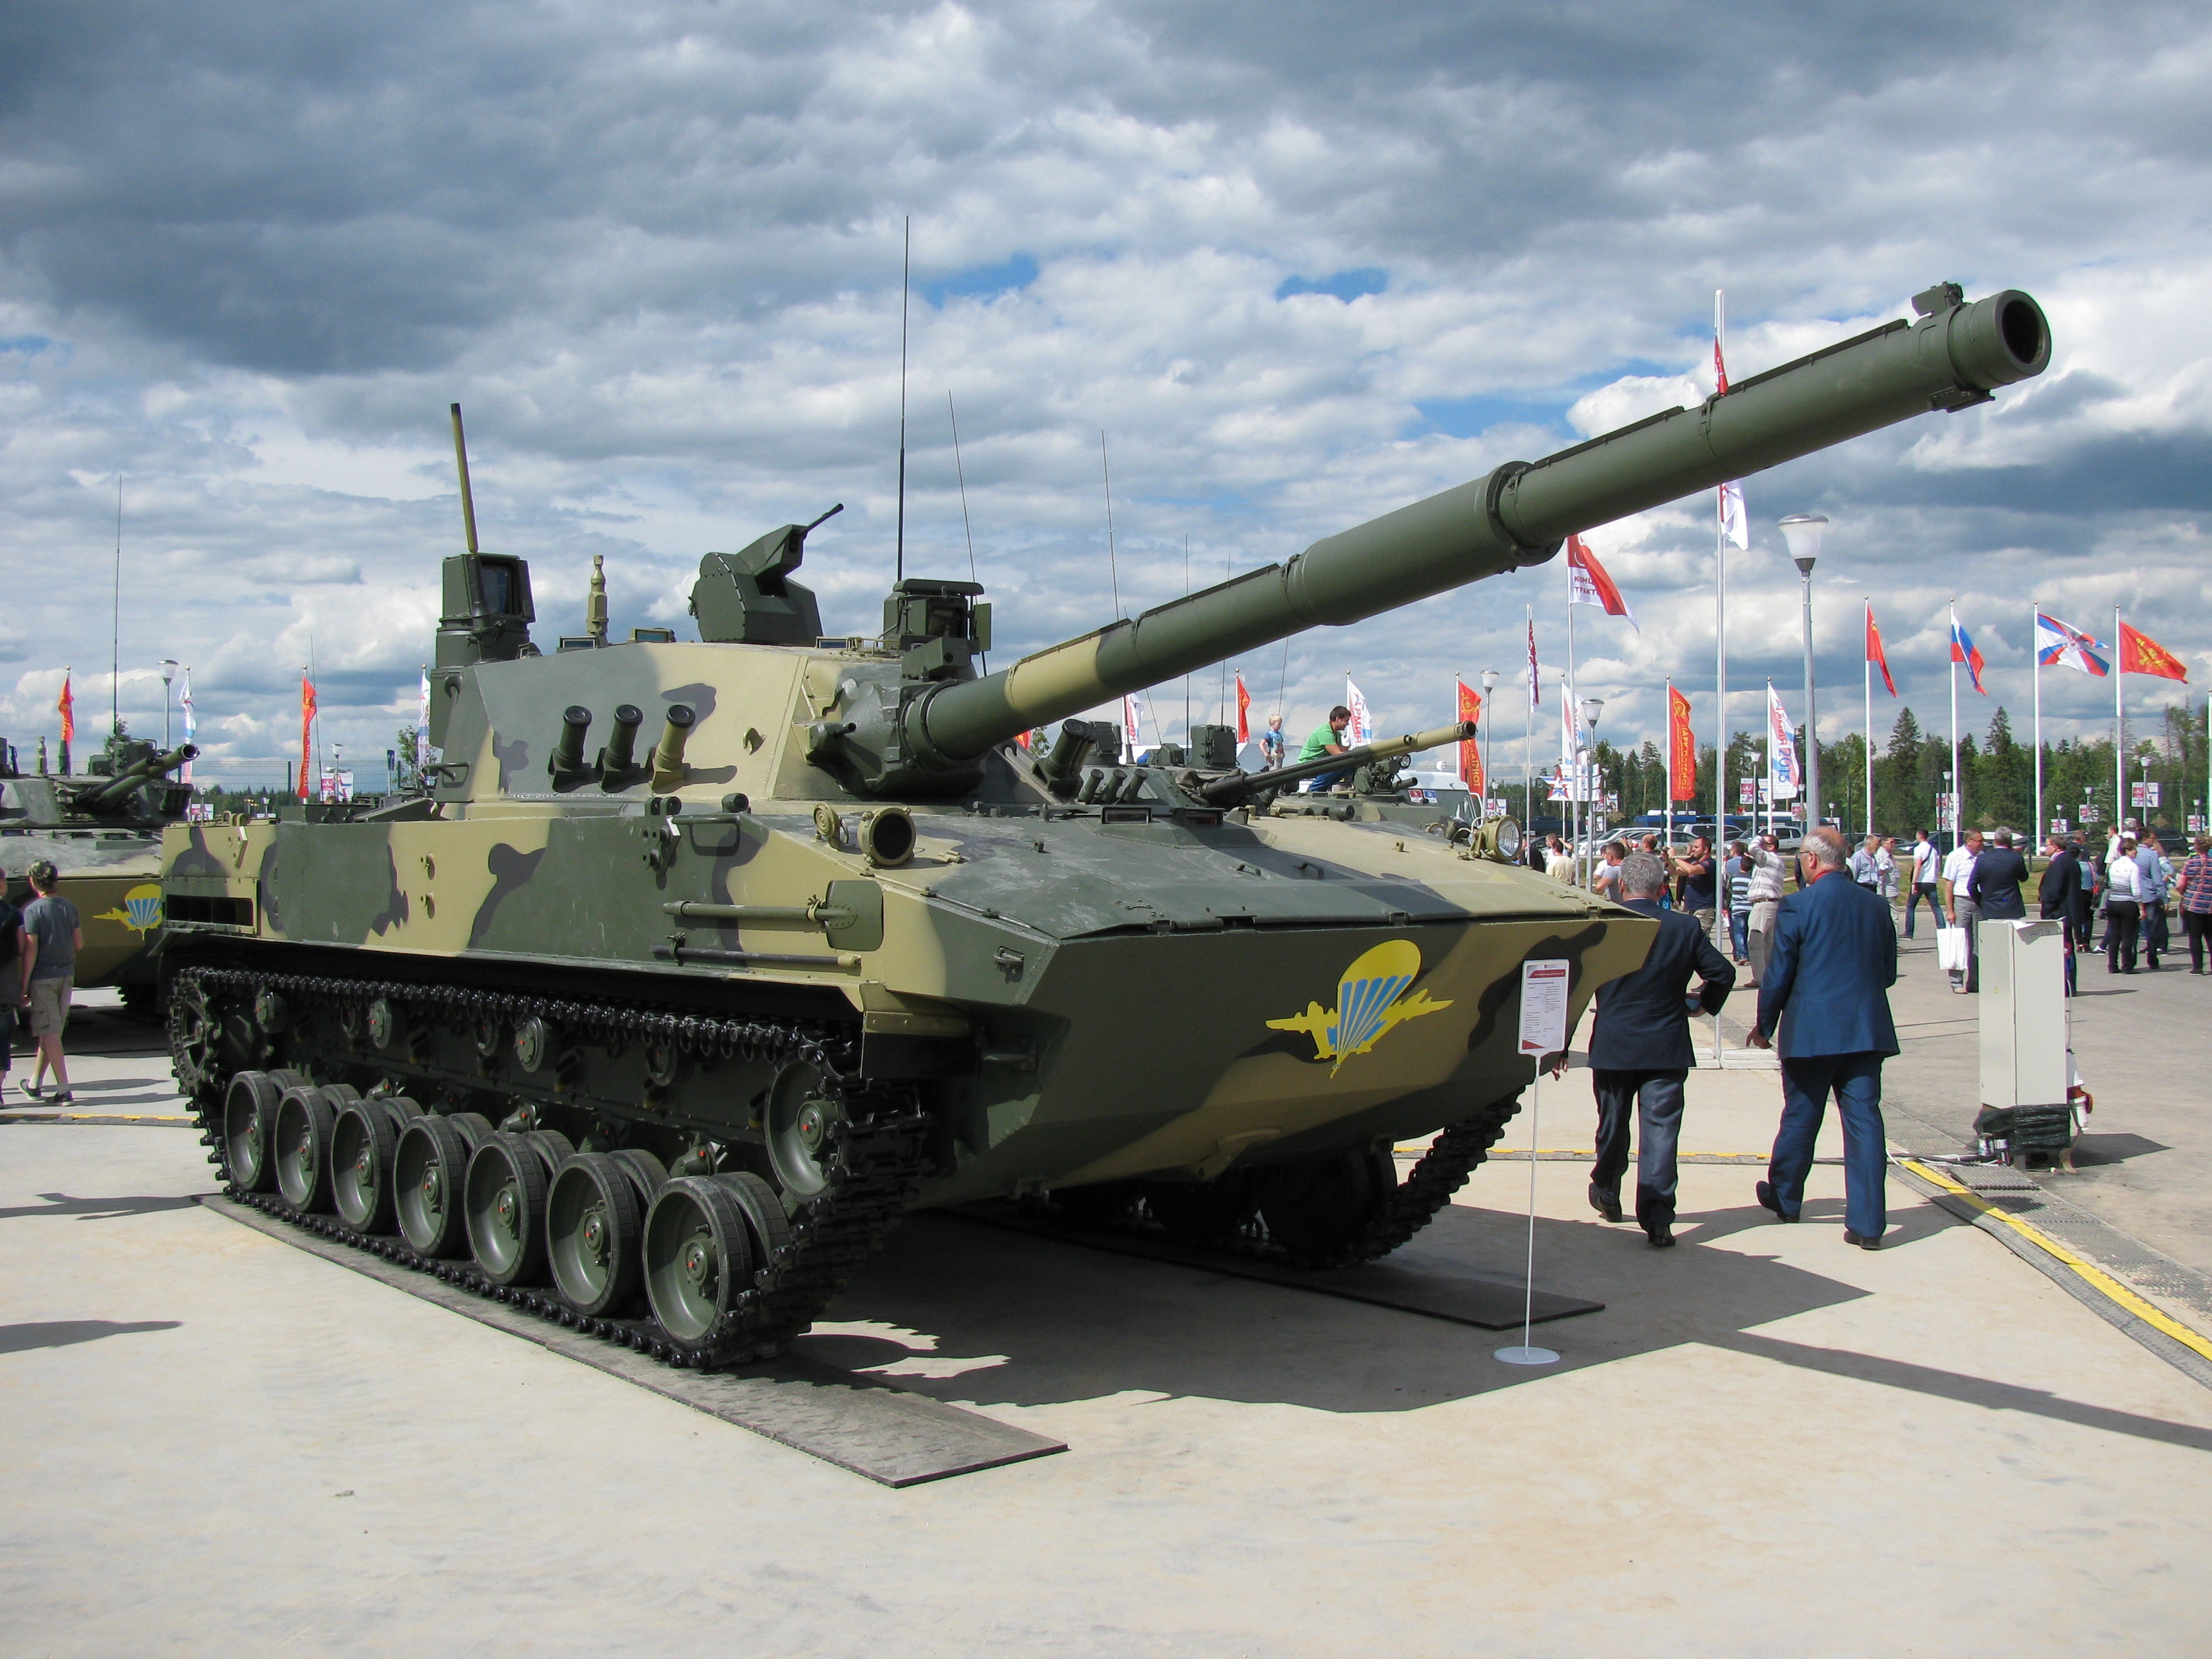 In Russia unveils in action a new Sprut-SDM1 airborne light tank